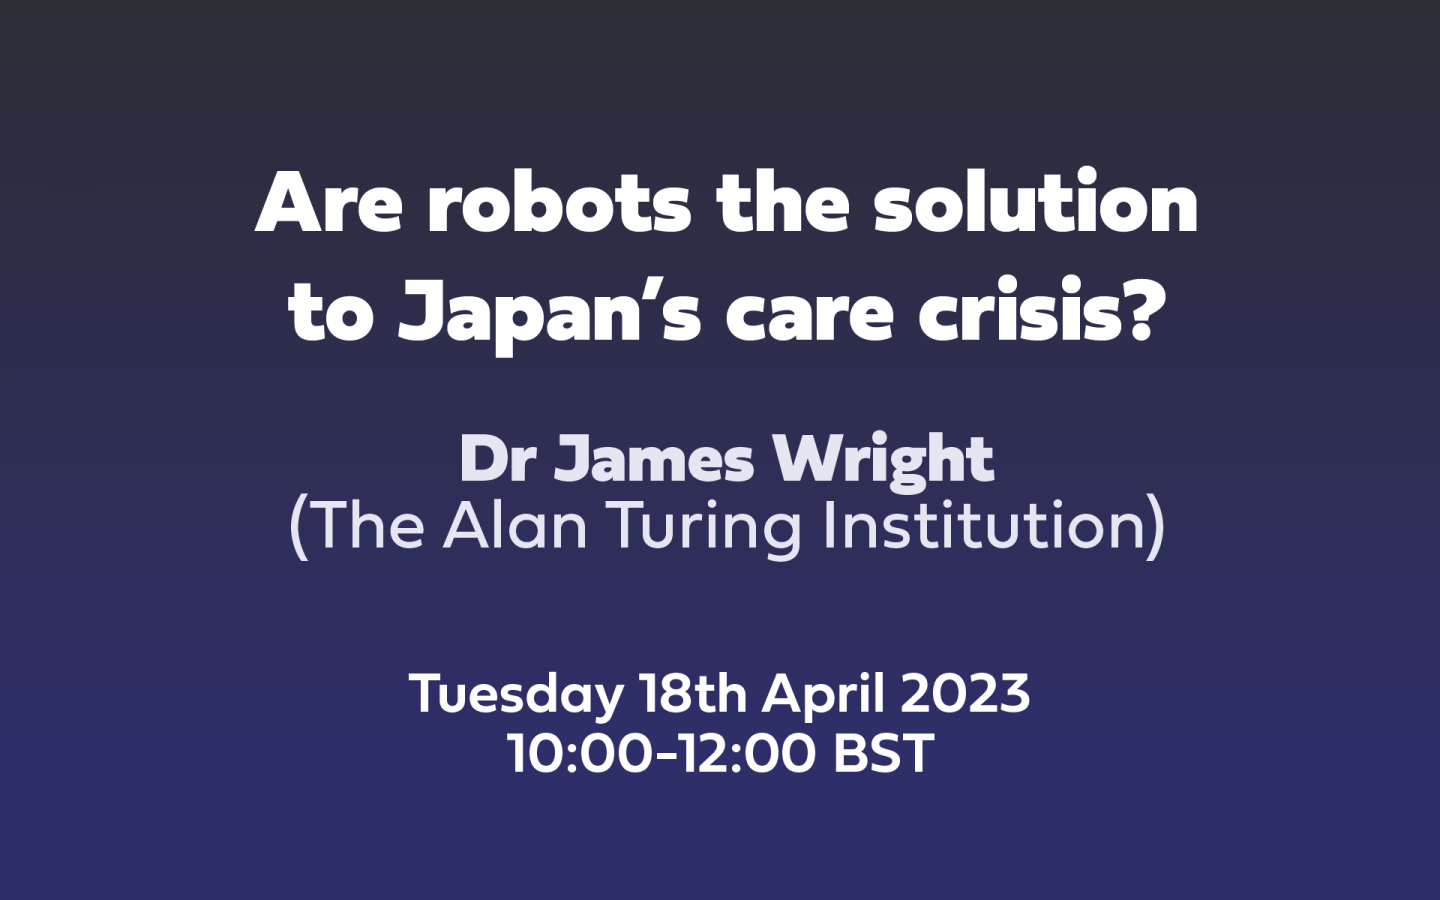 Text: Are robots the solution to Japan’s care crisis? Dr James Wright, The Alan Turing Institution, Tuesday 18th April 2023 10:00-12:00 BST